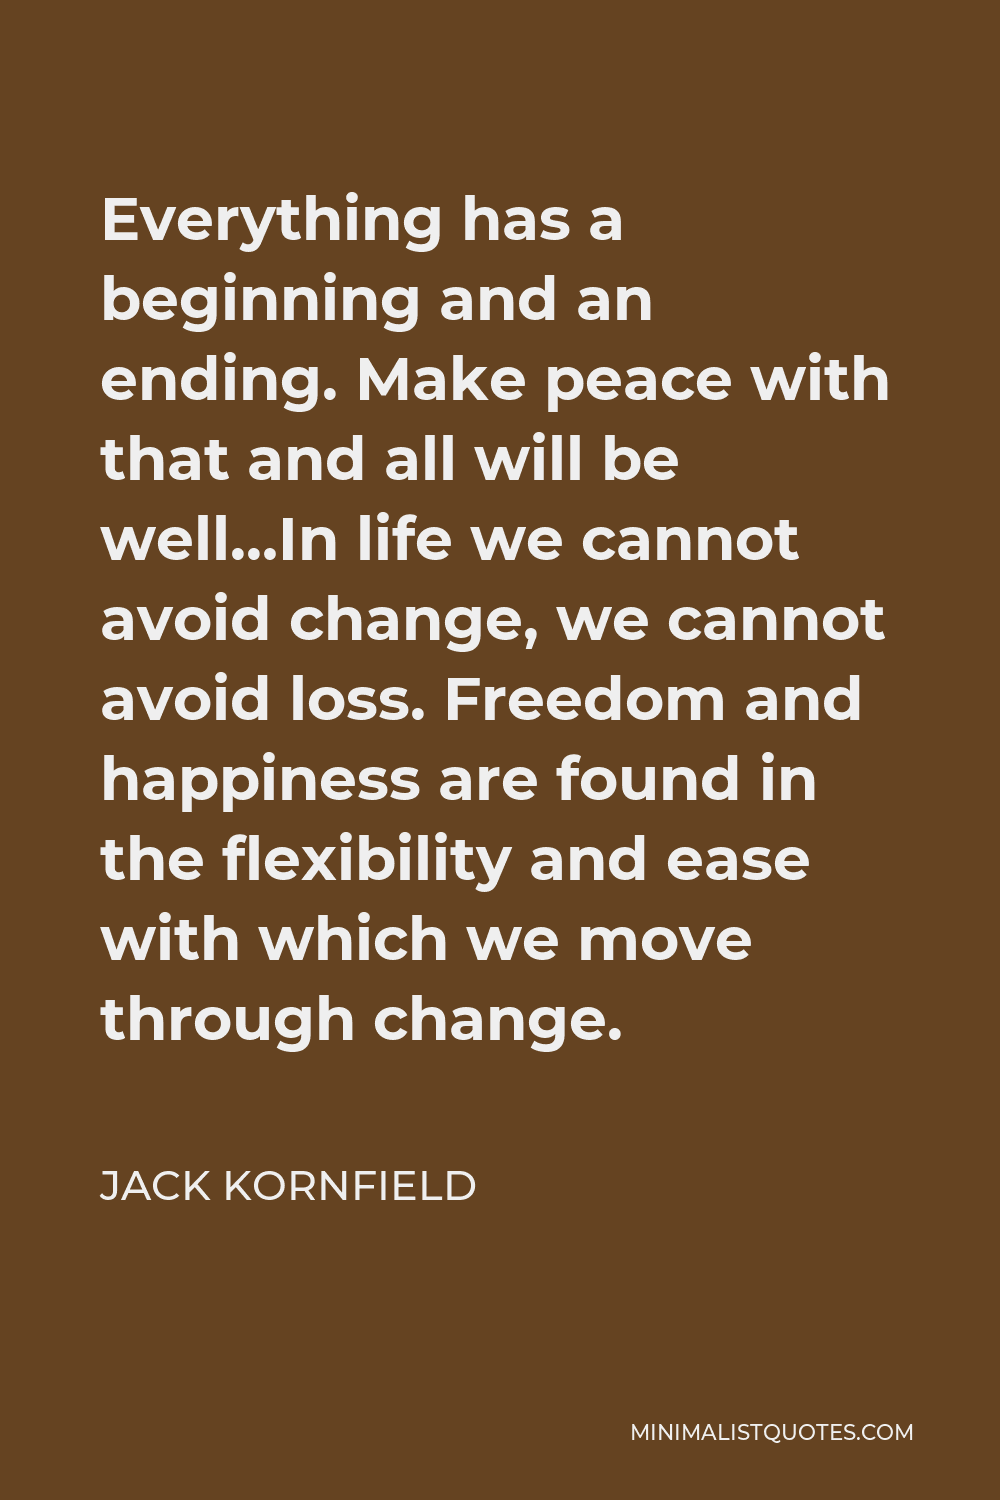 Jack Kornfield Quote - Everything has a beginning and an ending. Make peace with that and all will be well…In life we cannot avoid change, we cannot avoid loss. Freedom and happiness are found in the flexibility and ease with which we move through change.